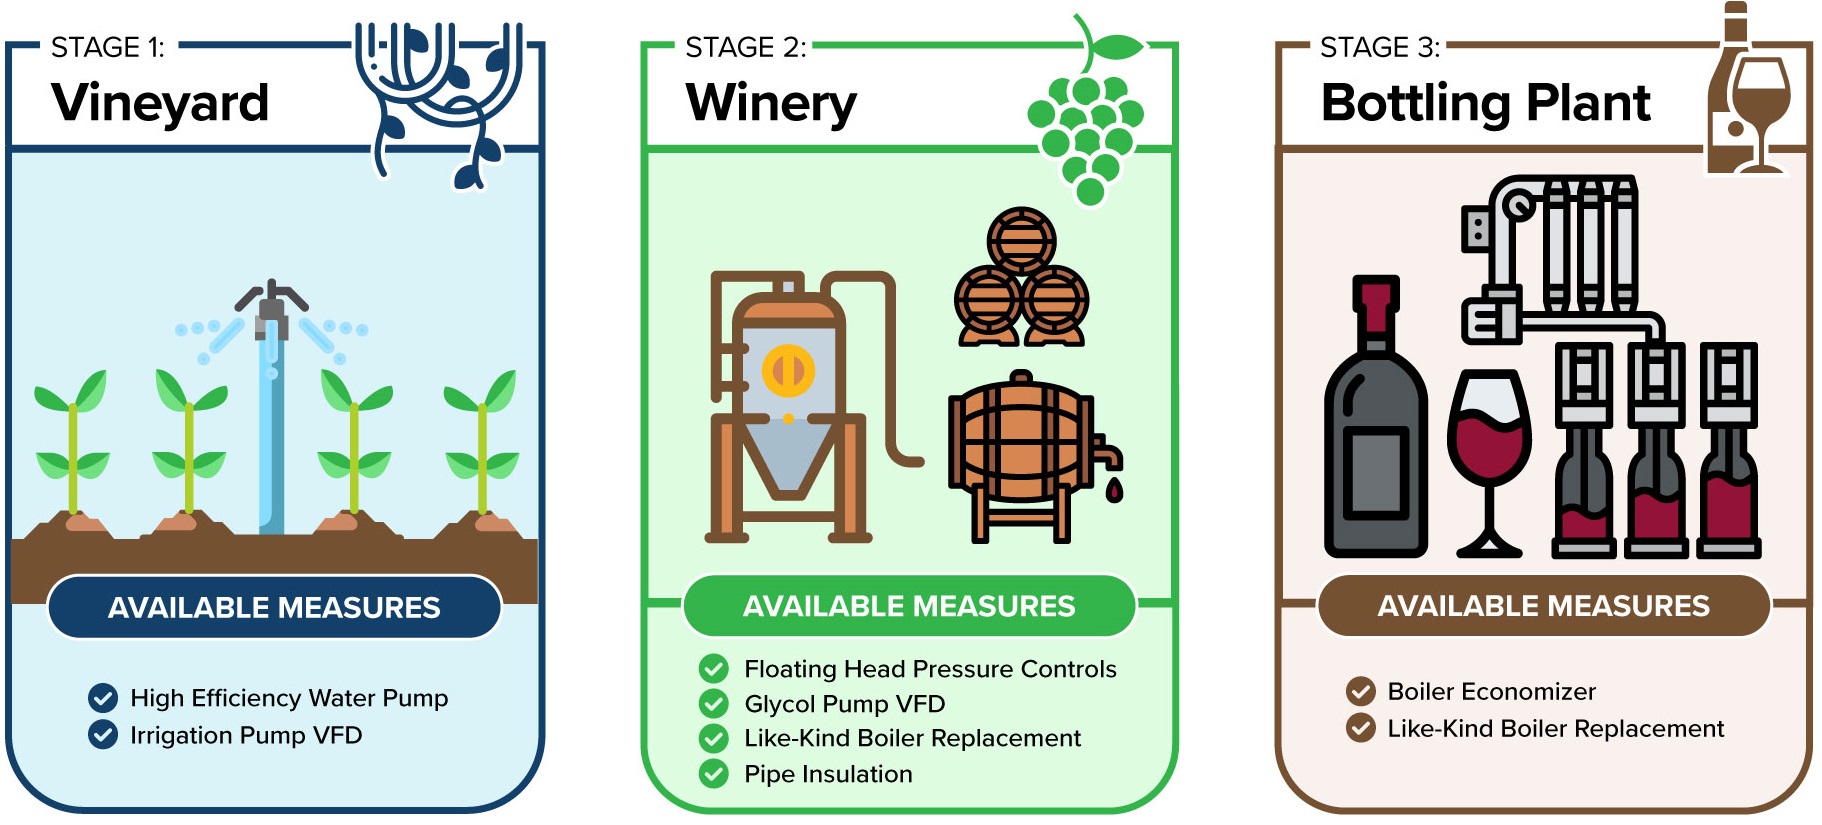 Infographic showcasing the 3 stages of winemaking (vineyard, winery, bottling plant) and available measures